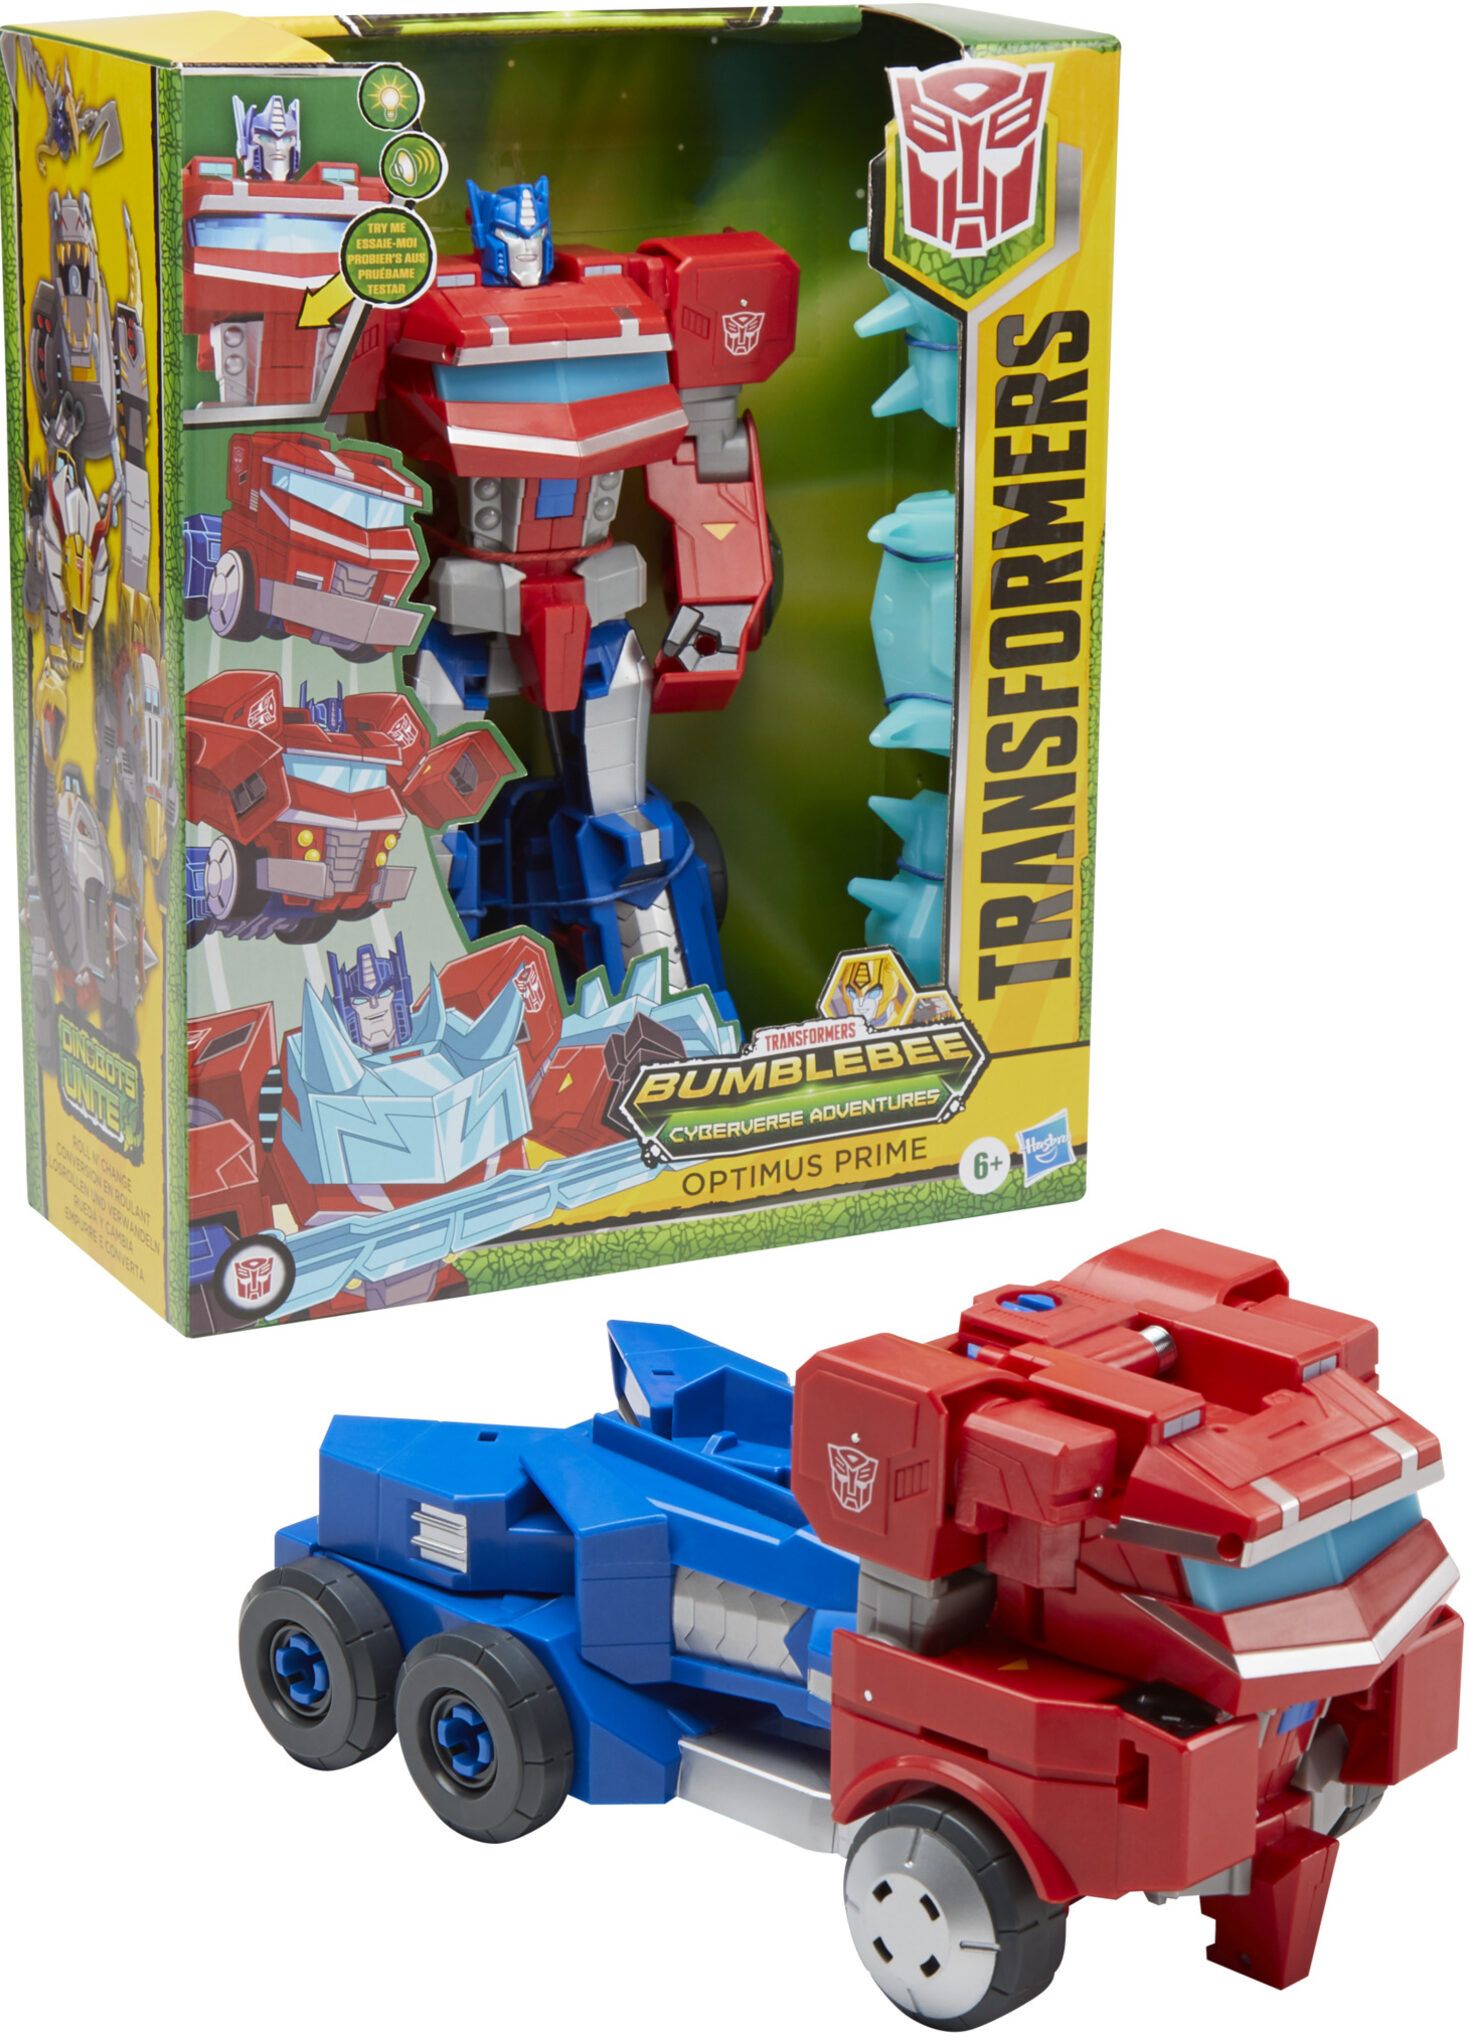 Transformers-Cyberverse-Roll-and-Transform-Optimus-Prime